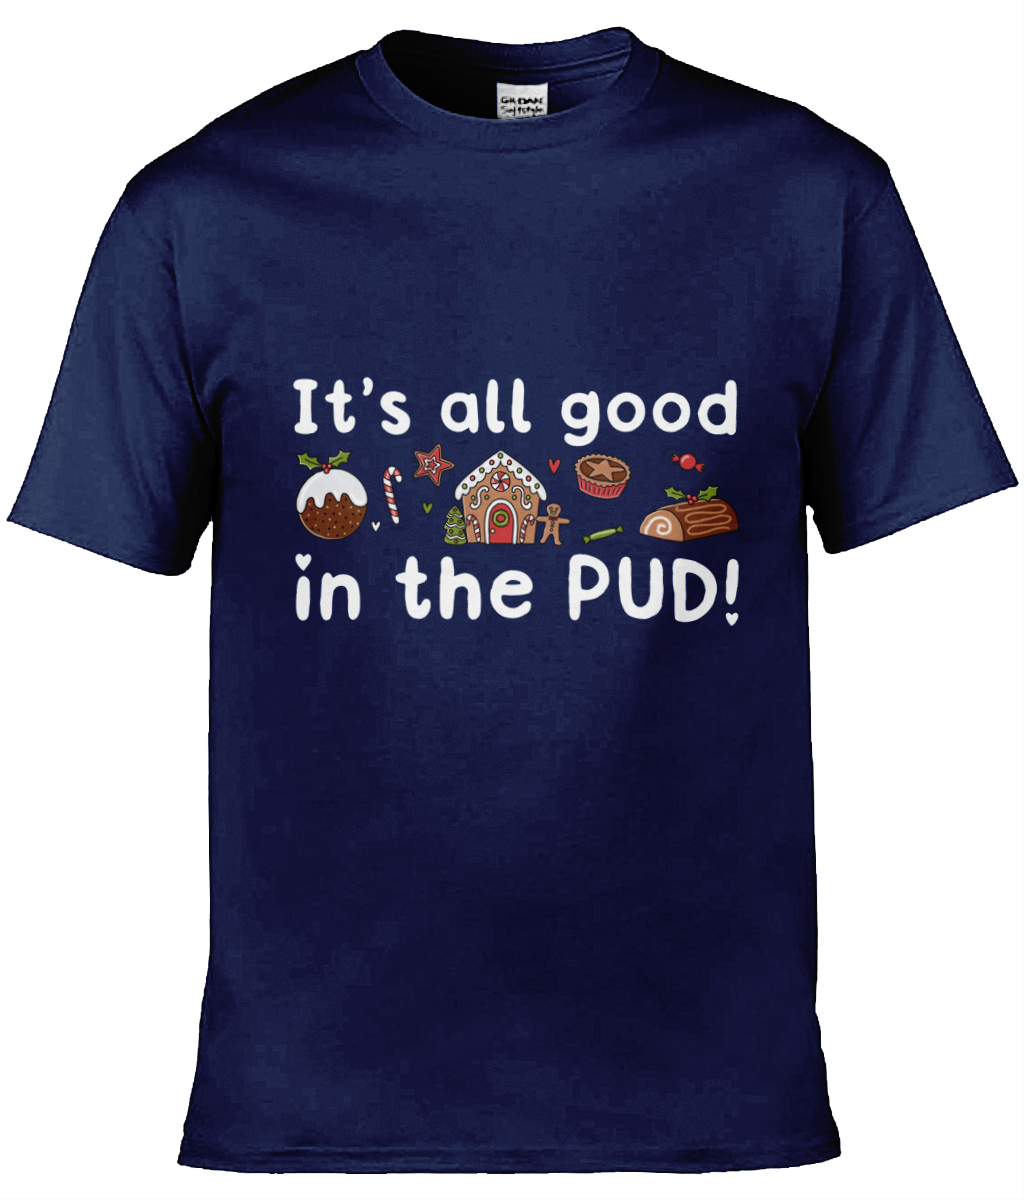 It's All Good In The Pud - Christmas T-Shirt - Multi Colour Available